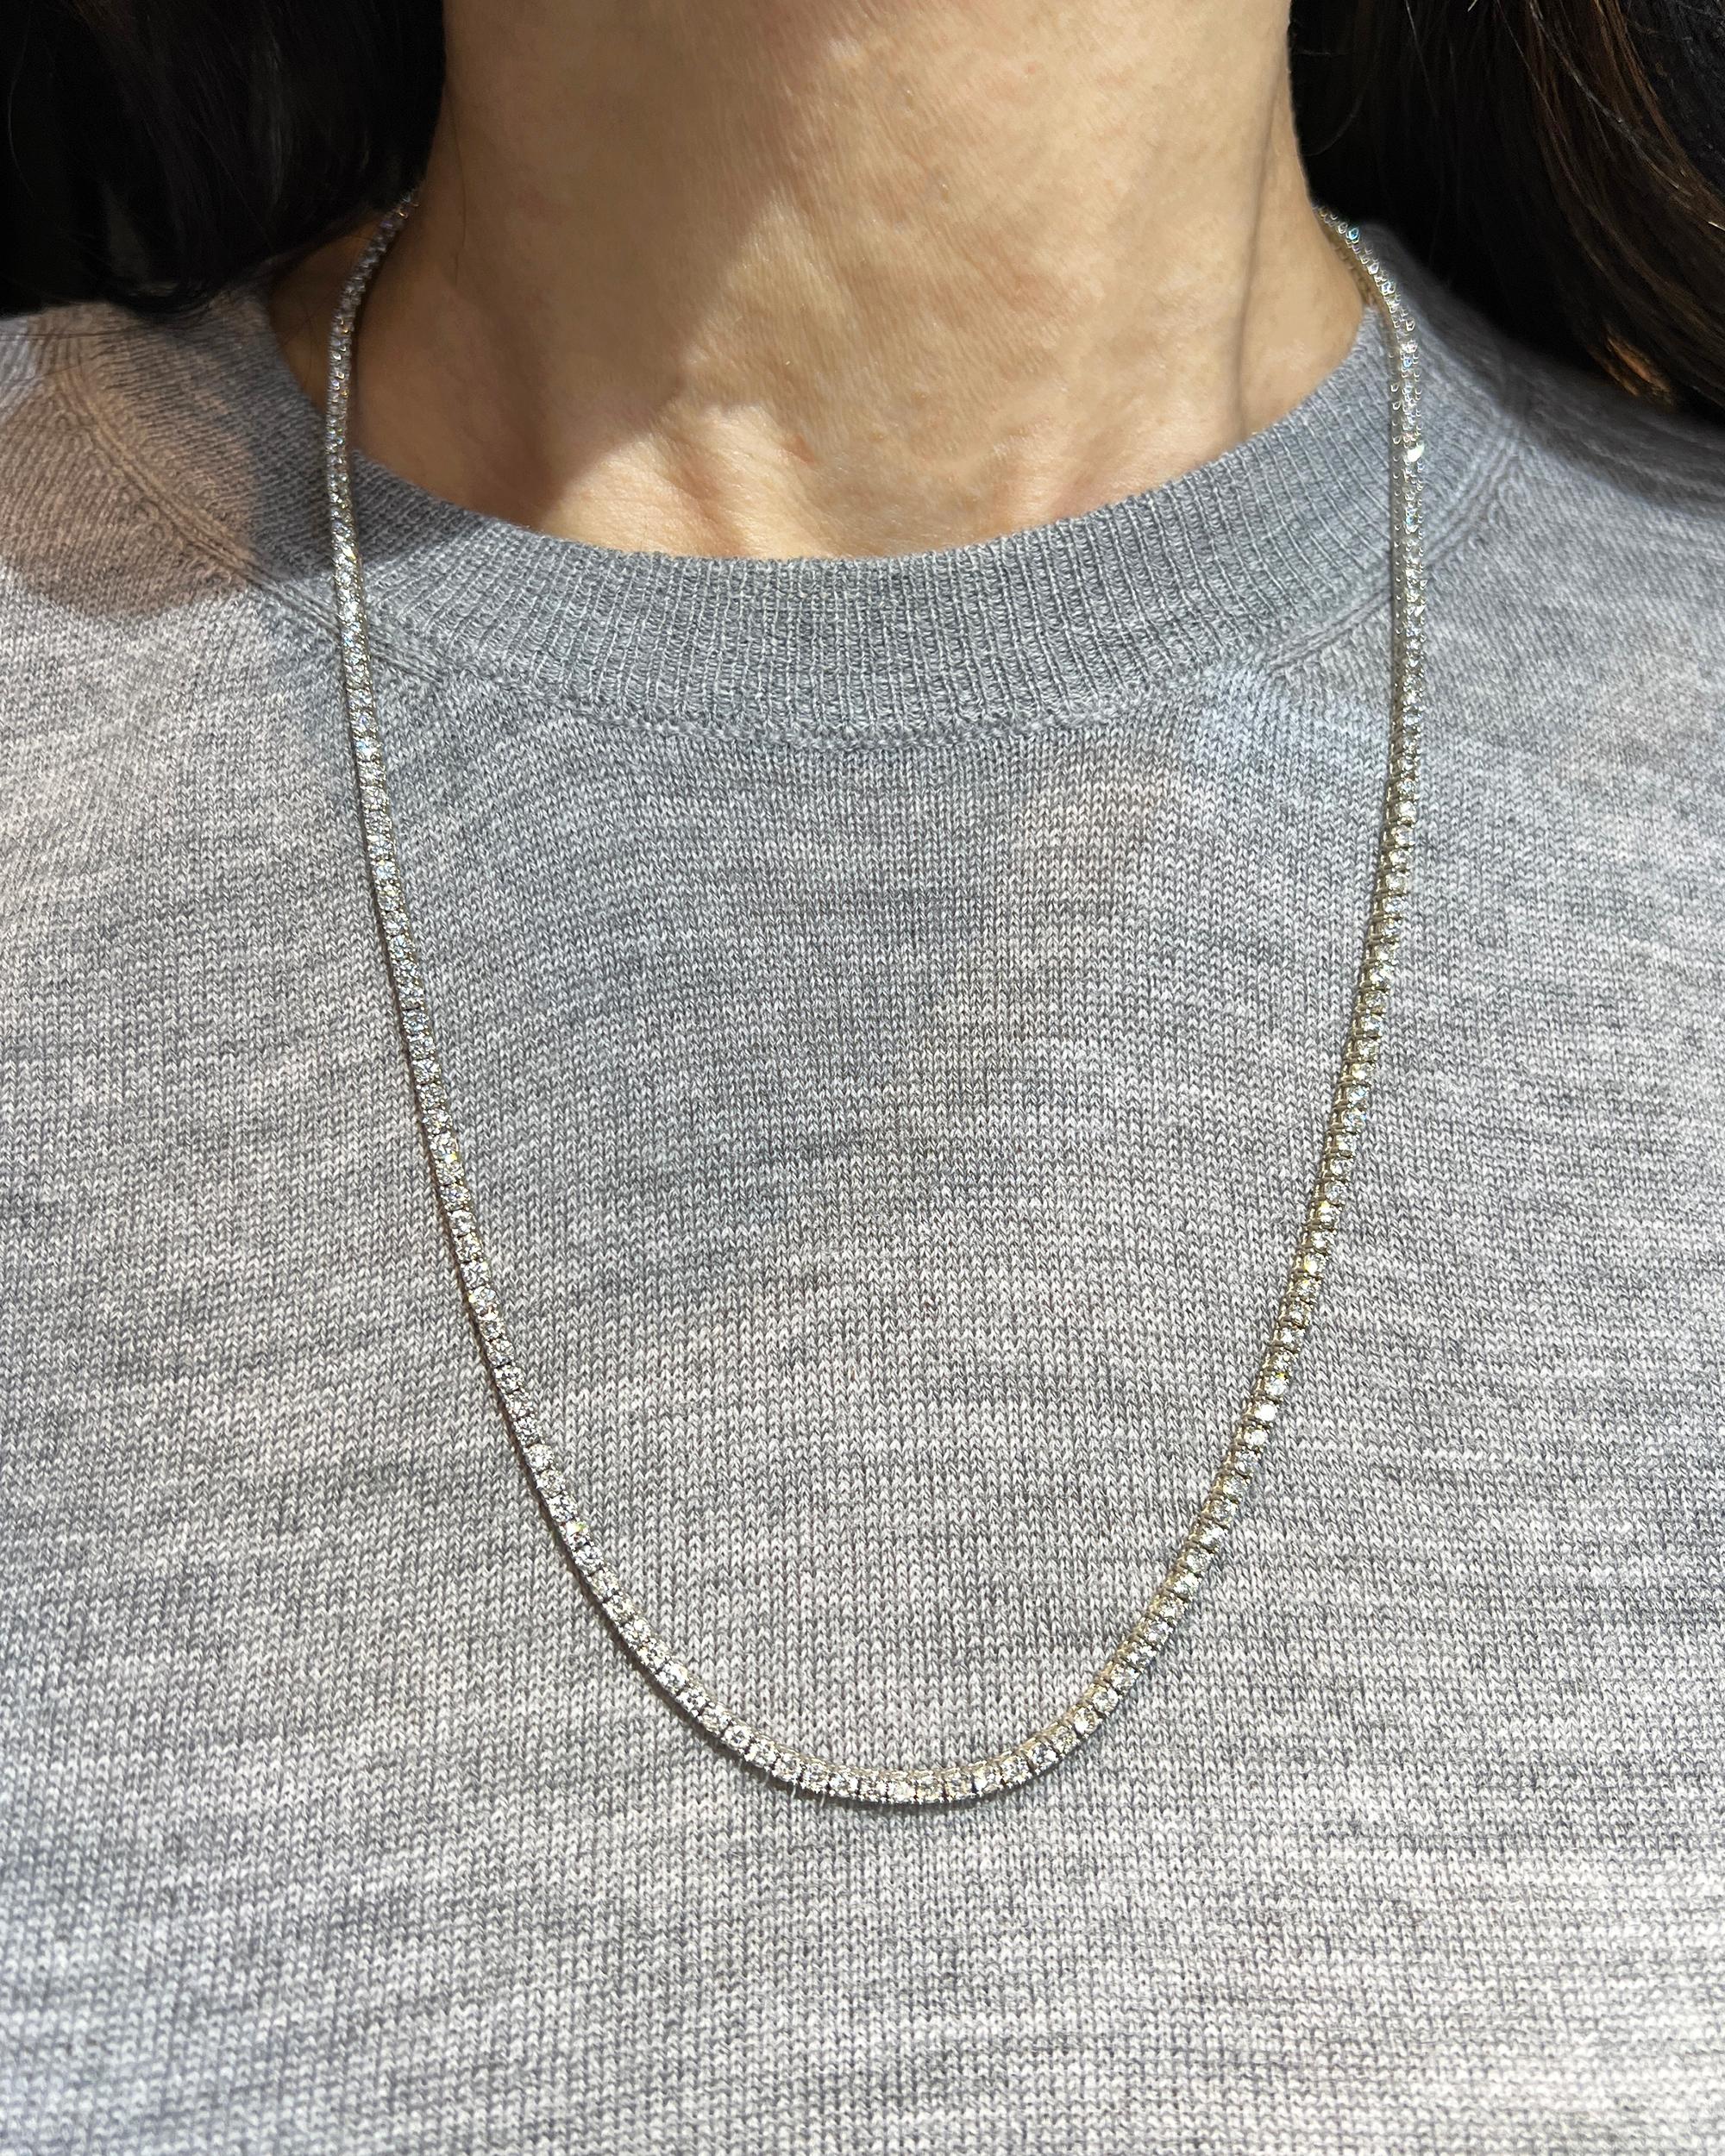 Timeless tennis necklace comprising of round diamonds weighing 11.94 carats total.
Carat weight of each diamond is 0.05.
The diamonds are not certified and estimated as G-H colors, VS-SI clarity.
Metal is 14k white gold. Weight is 20.99 grams. 
The